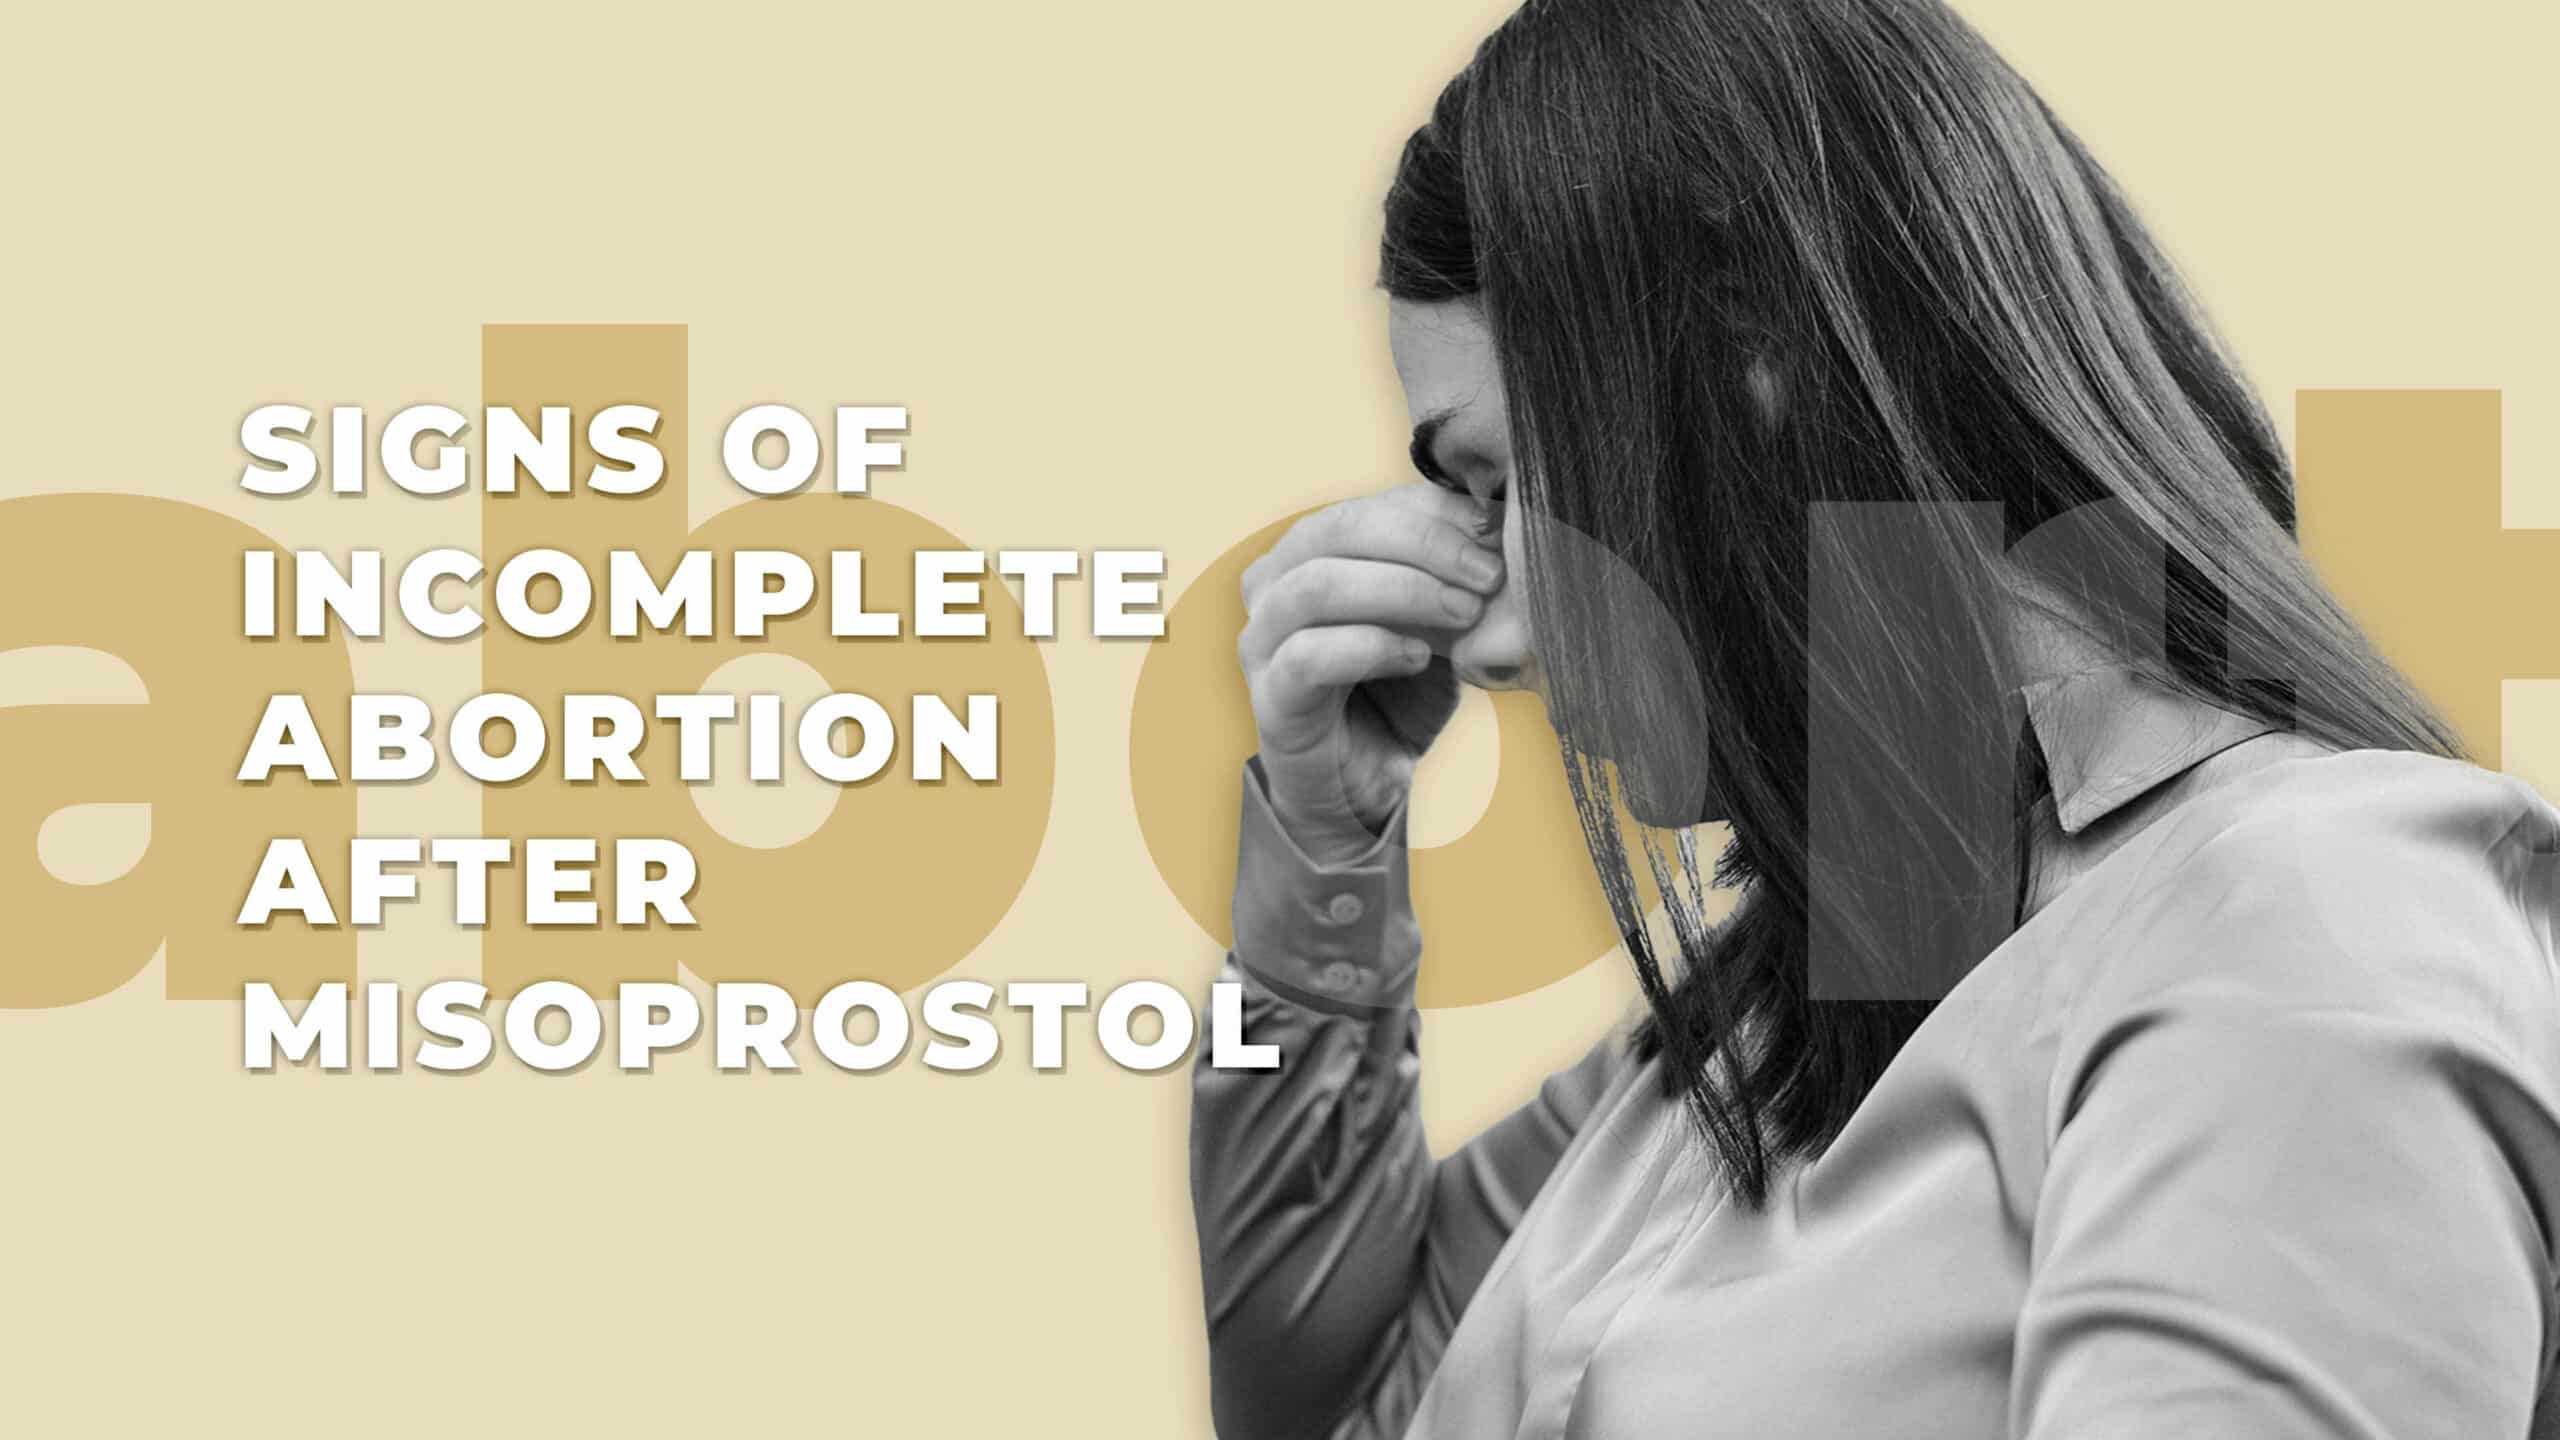 Signs of incomplete abortion after misoprostol